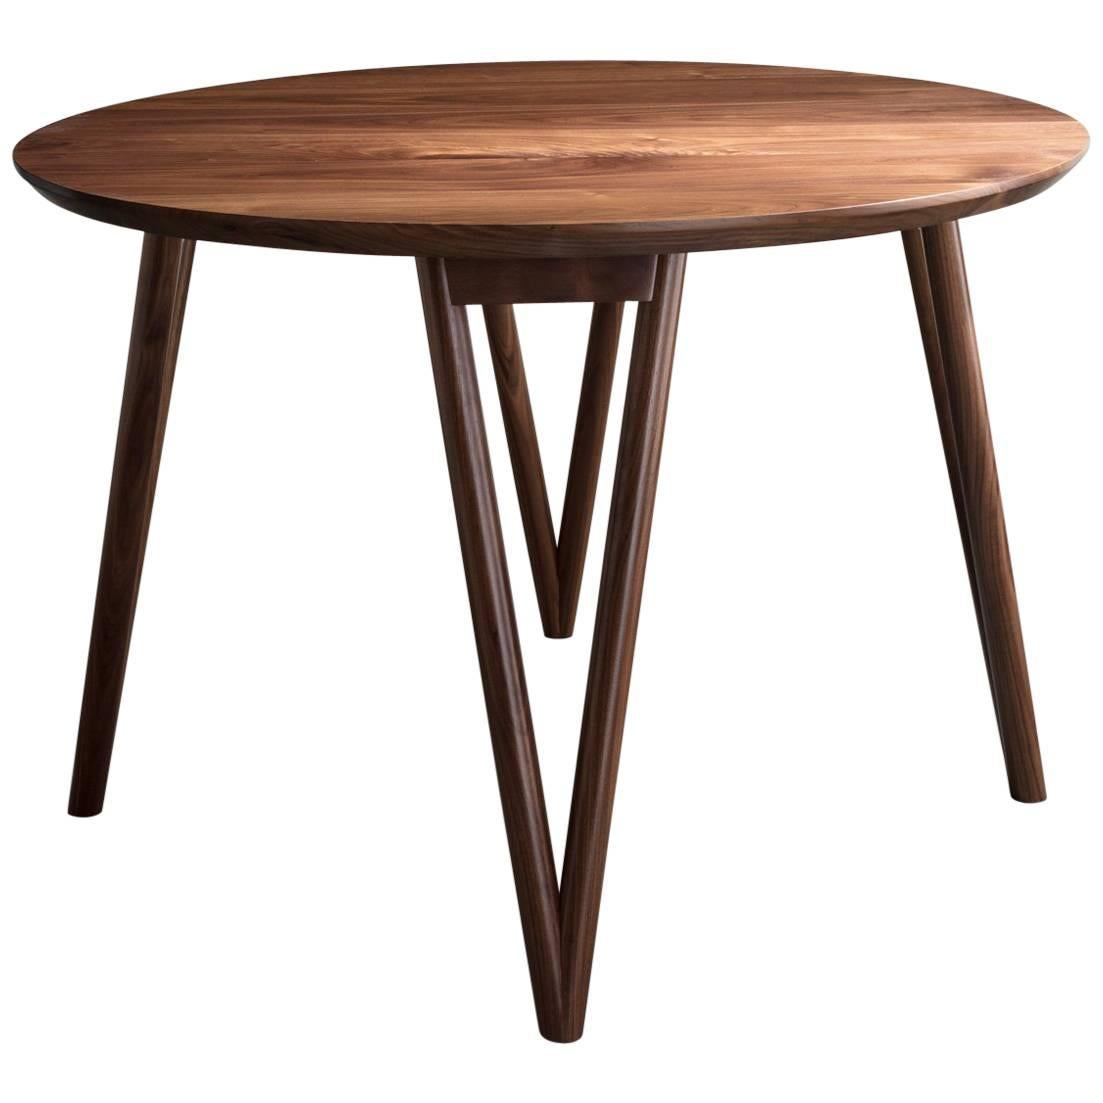 Hair Pin Table 42, Round, Walnut Hardwood, Dining, Center Table For Sale